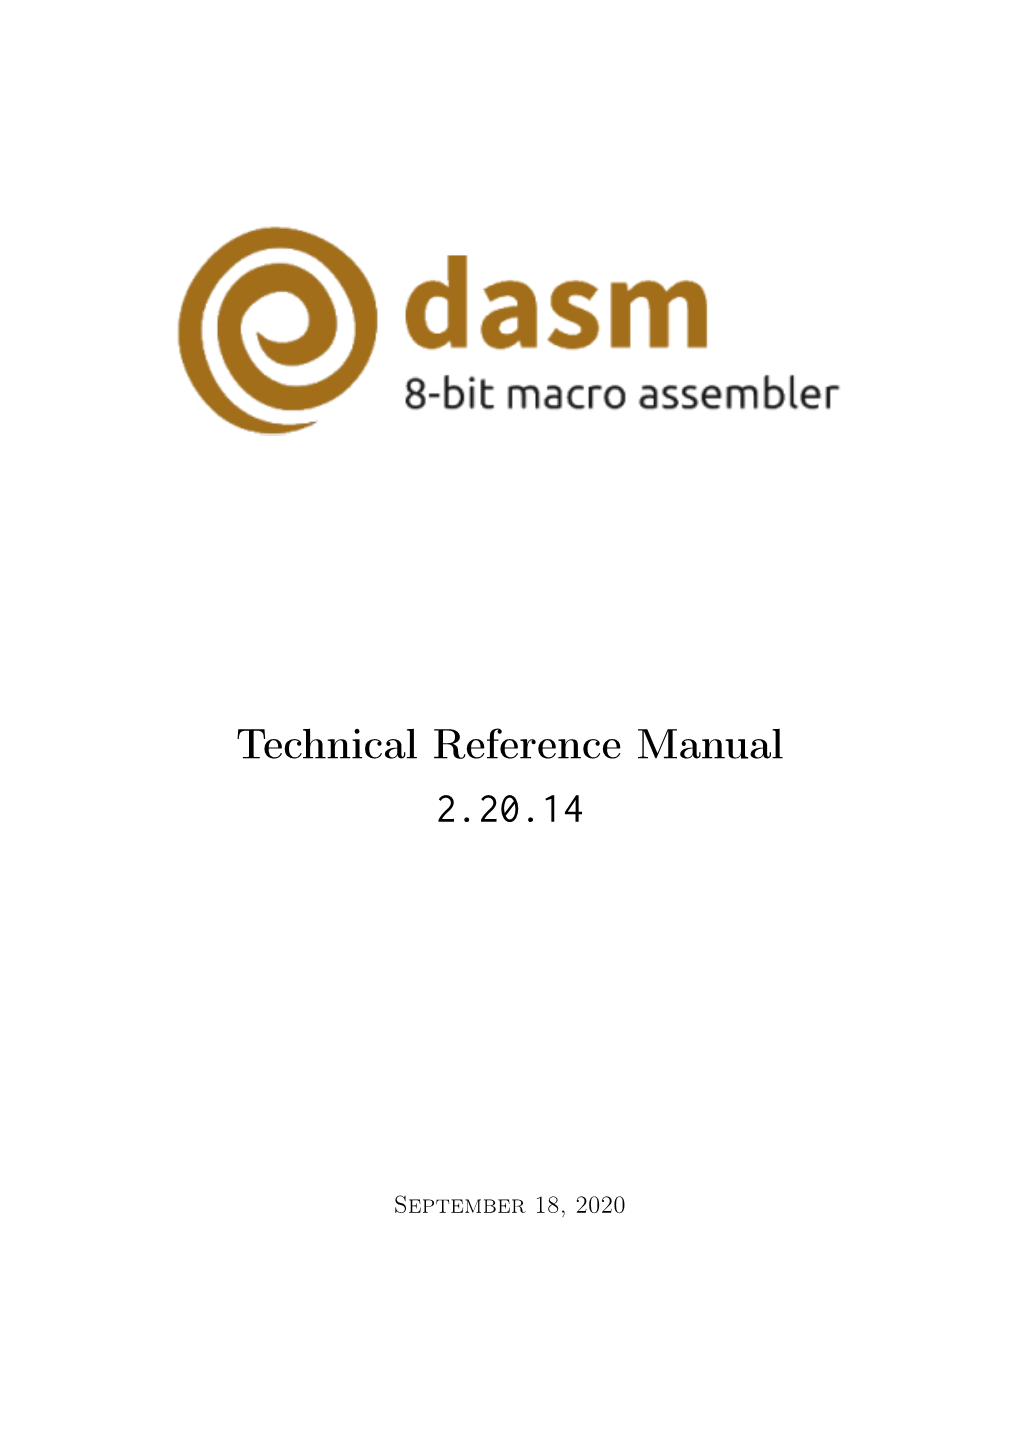 Technical Reference Manual 2.20.14